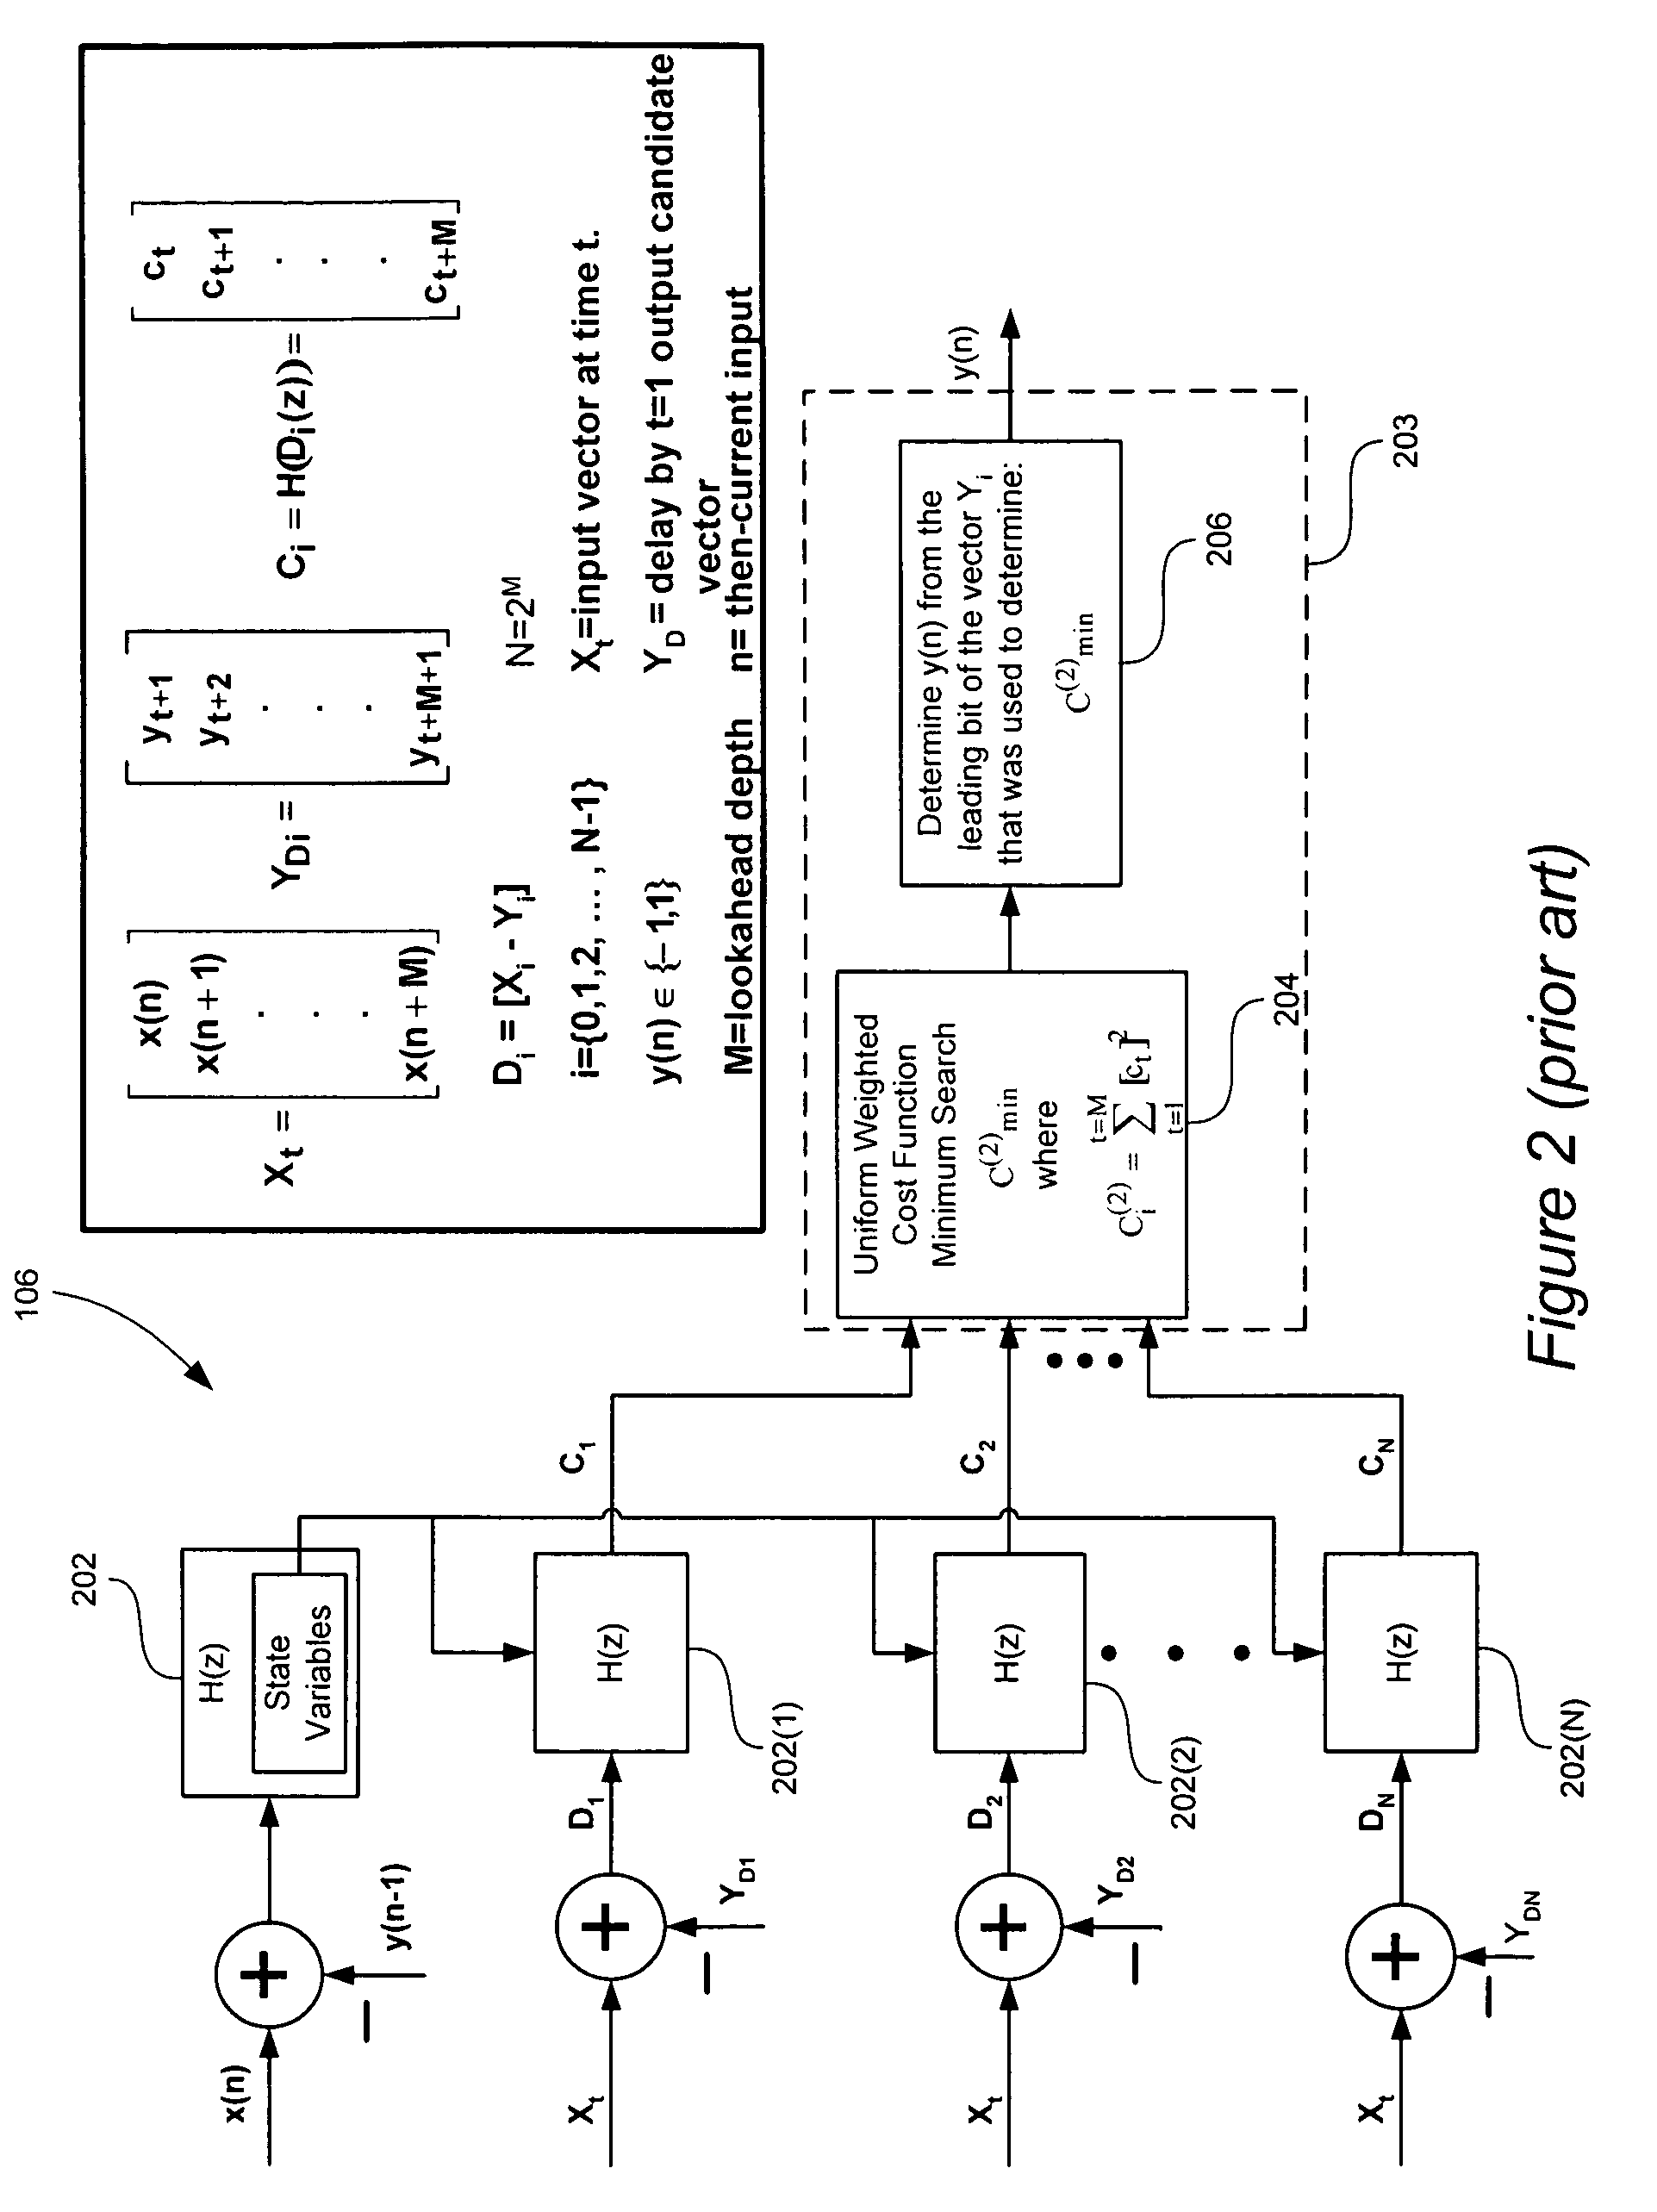 Look-ahead delta sigma modulator having an infinite impulse response filter with multiple look-ahead outputs